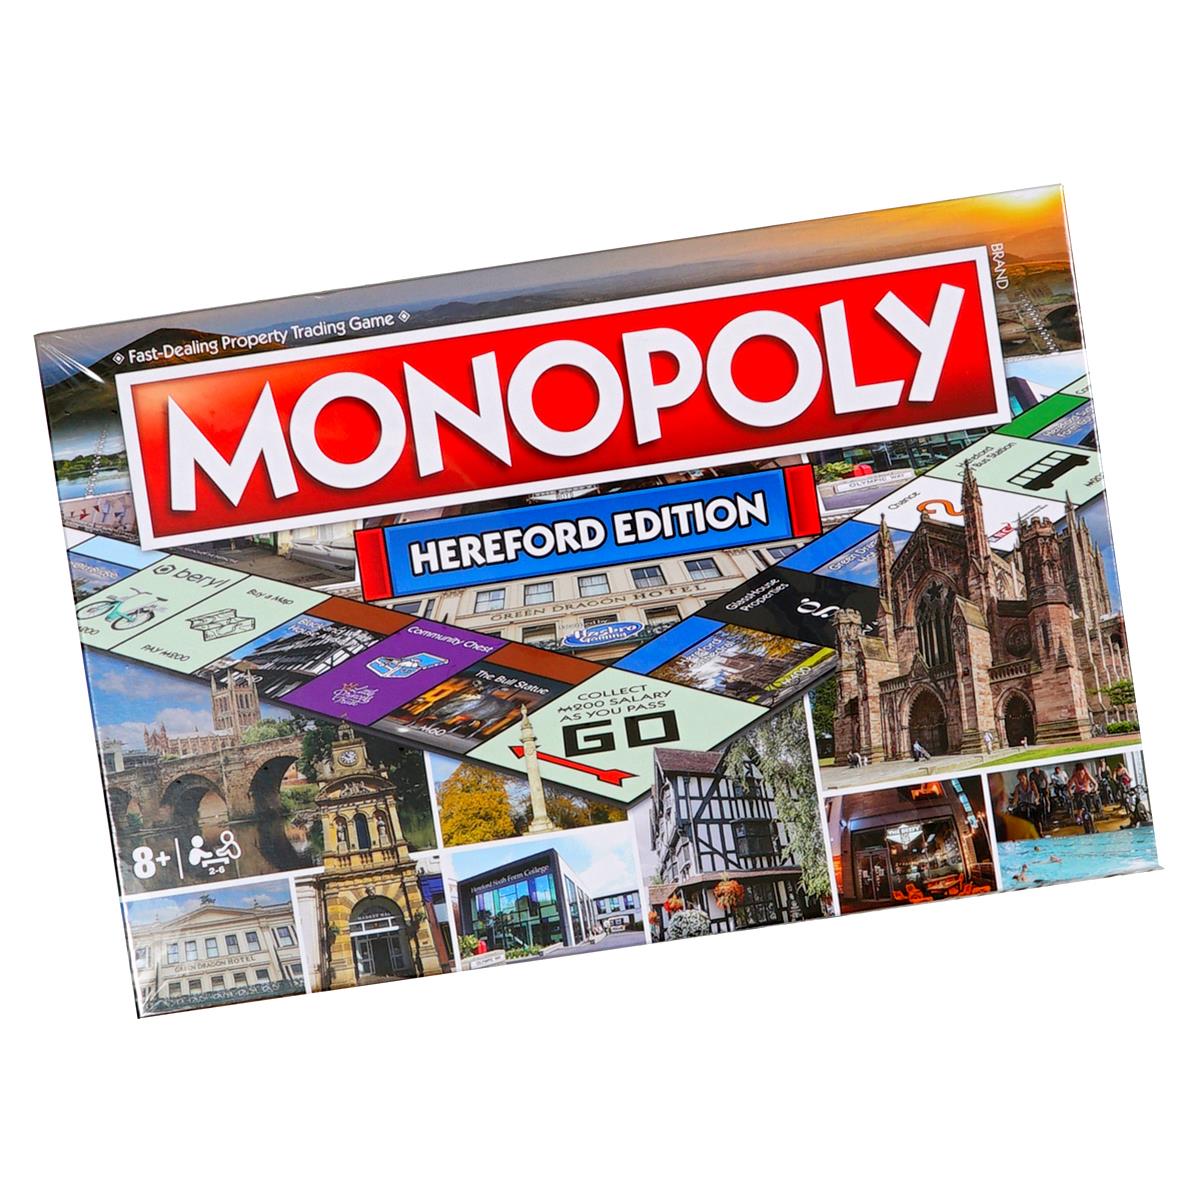 Can you buy these locations in the Hereford Monopoly game?